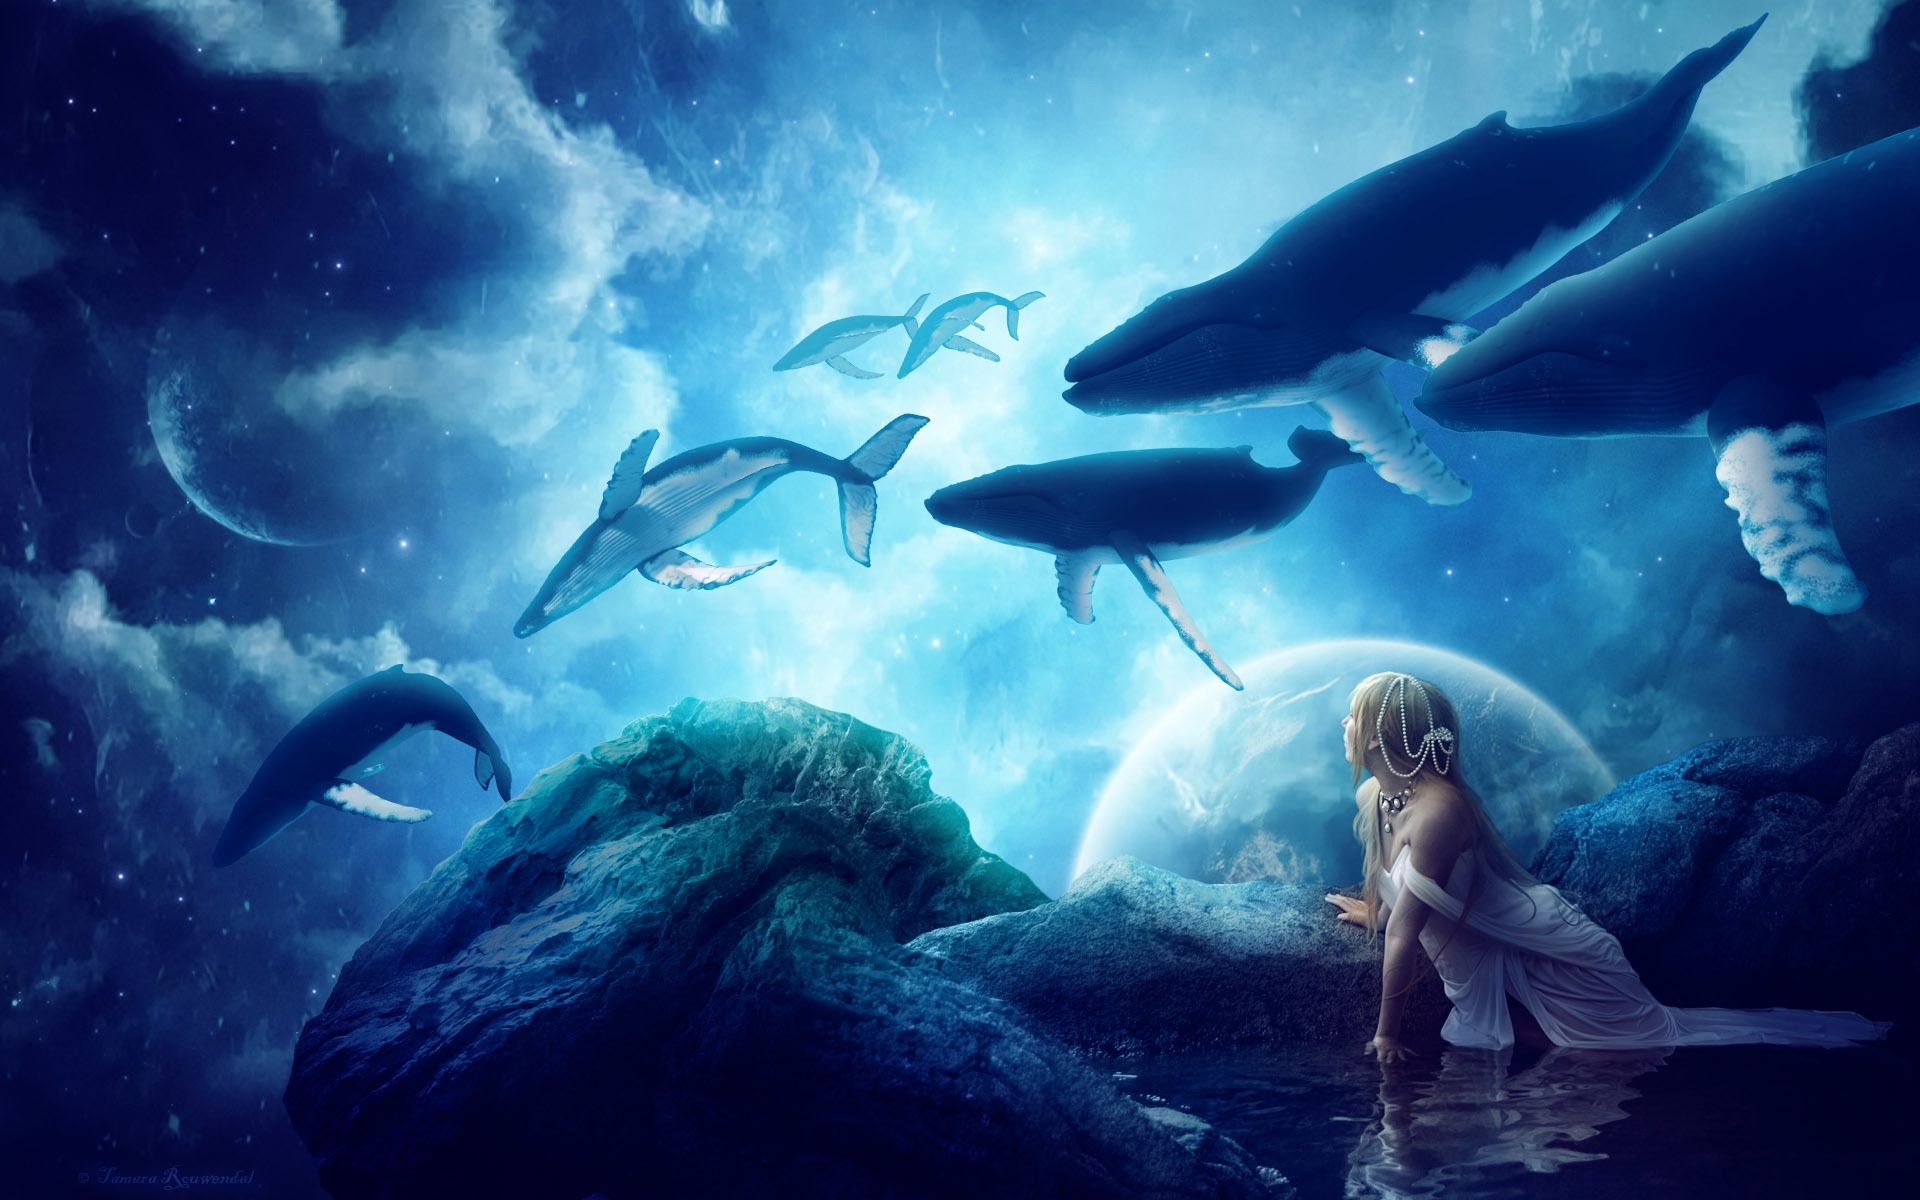 Wallpaper Creative Pictures Whales Dream World Fantasy Girl